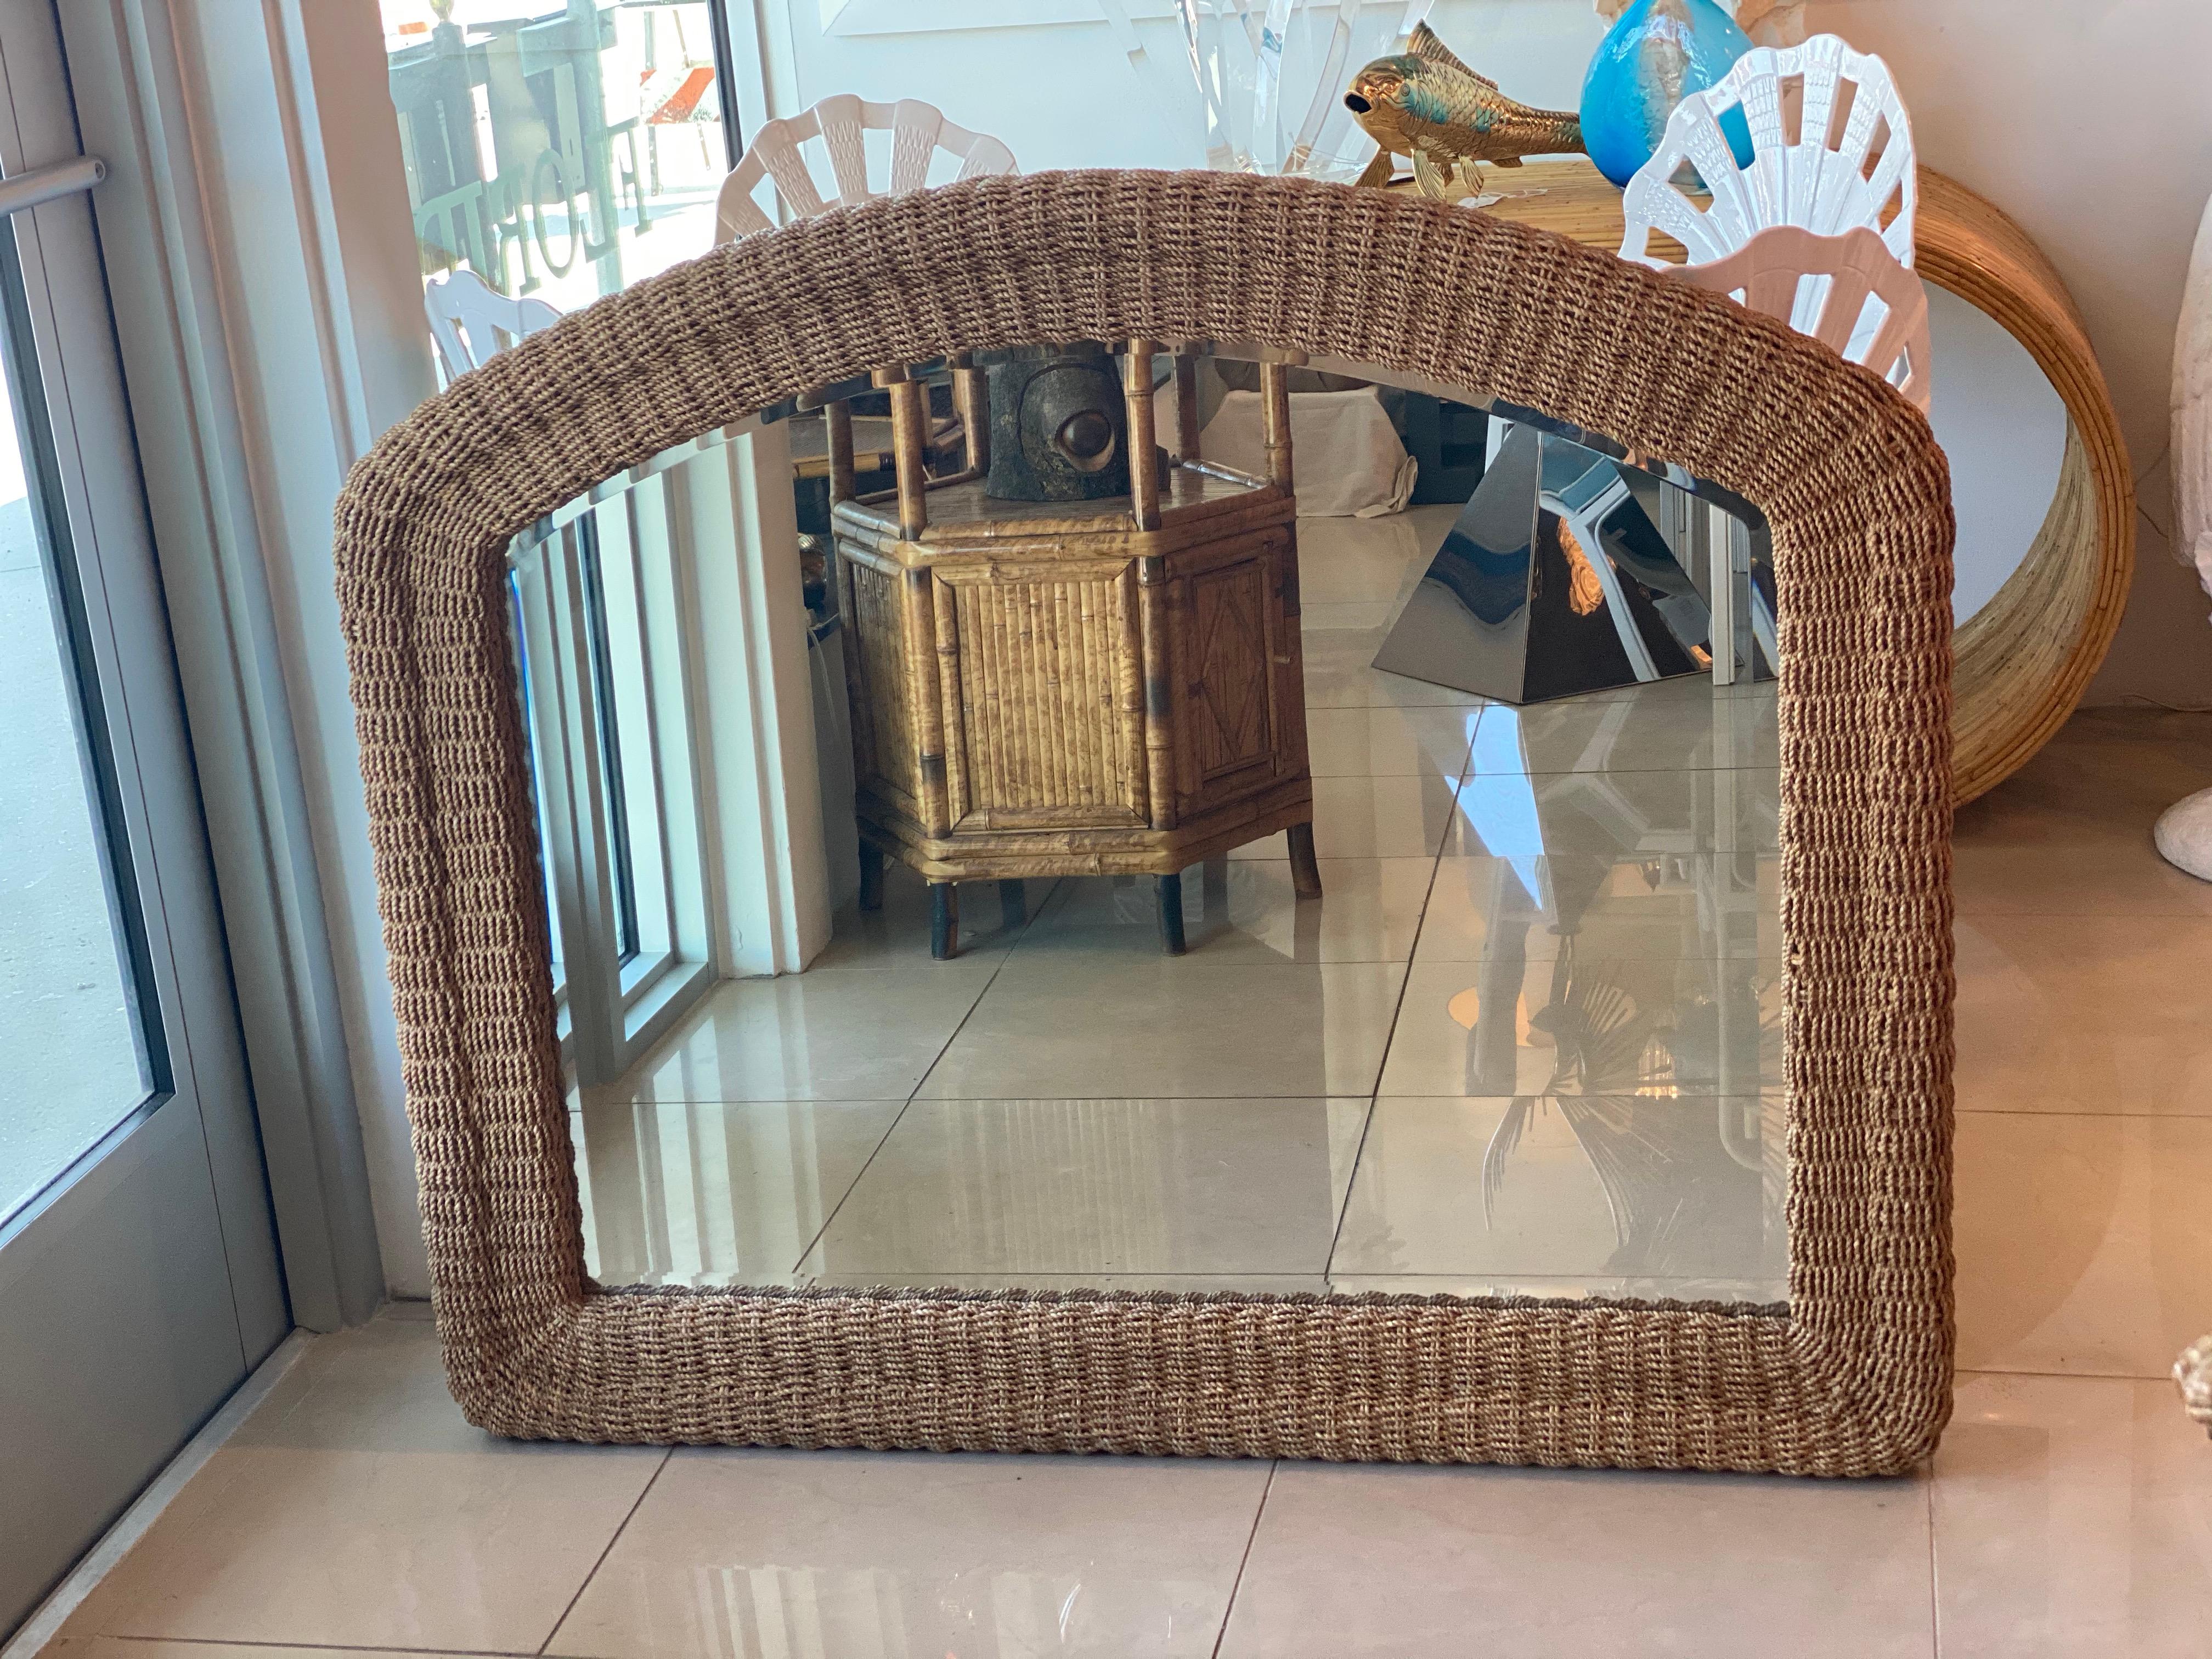 Beautiful vintage arched wall mirror. Comes ready to hang on your wall. Braided seagrass rope weaved in wicker.